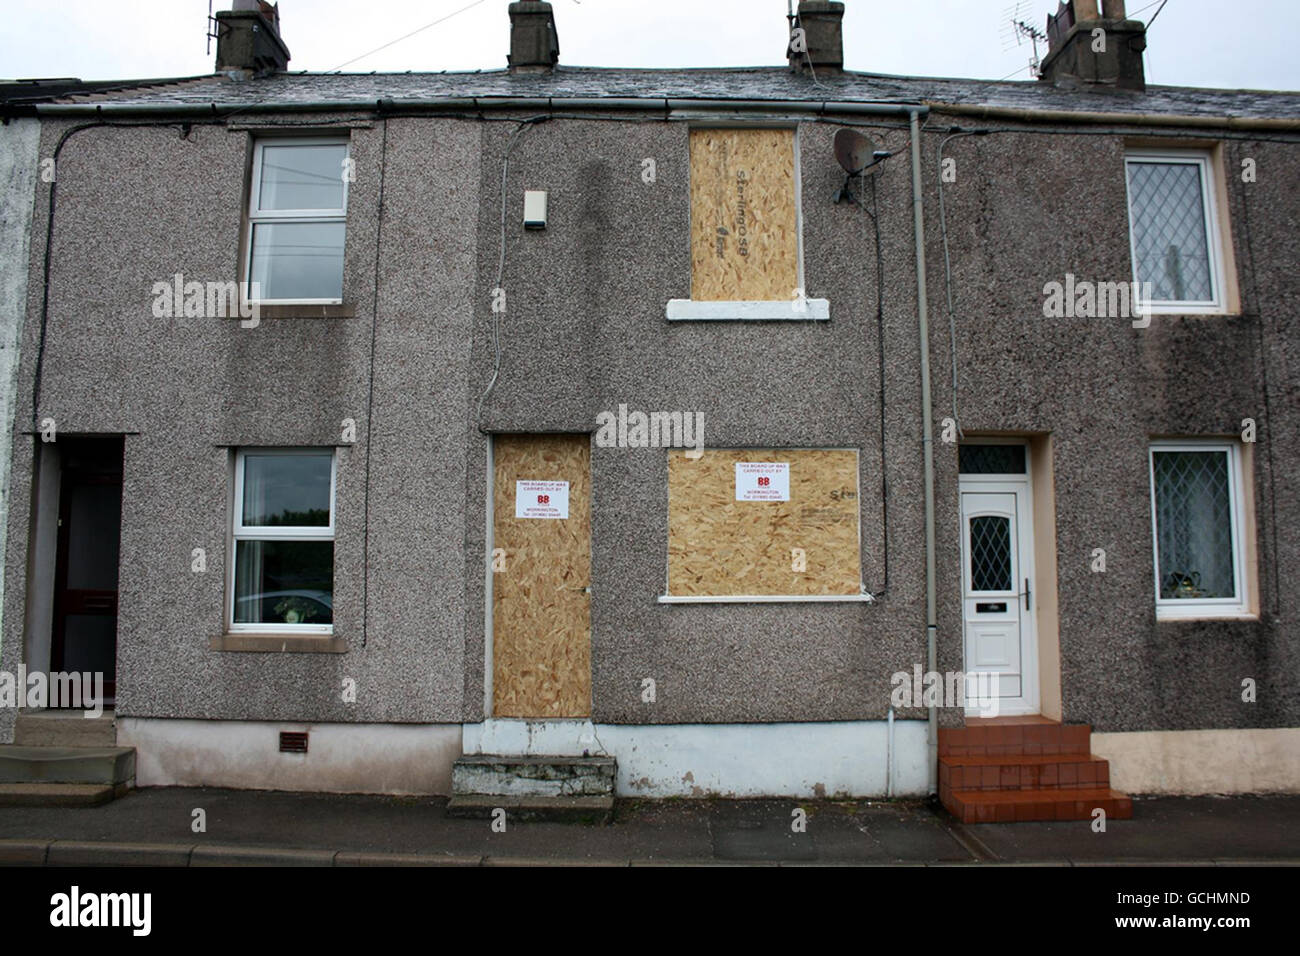 General gunman Derrick Bird's house on Rowrah Road in Rowrah, near Whitehaven, which has been boarded up. Stock Photo